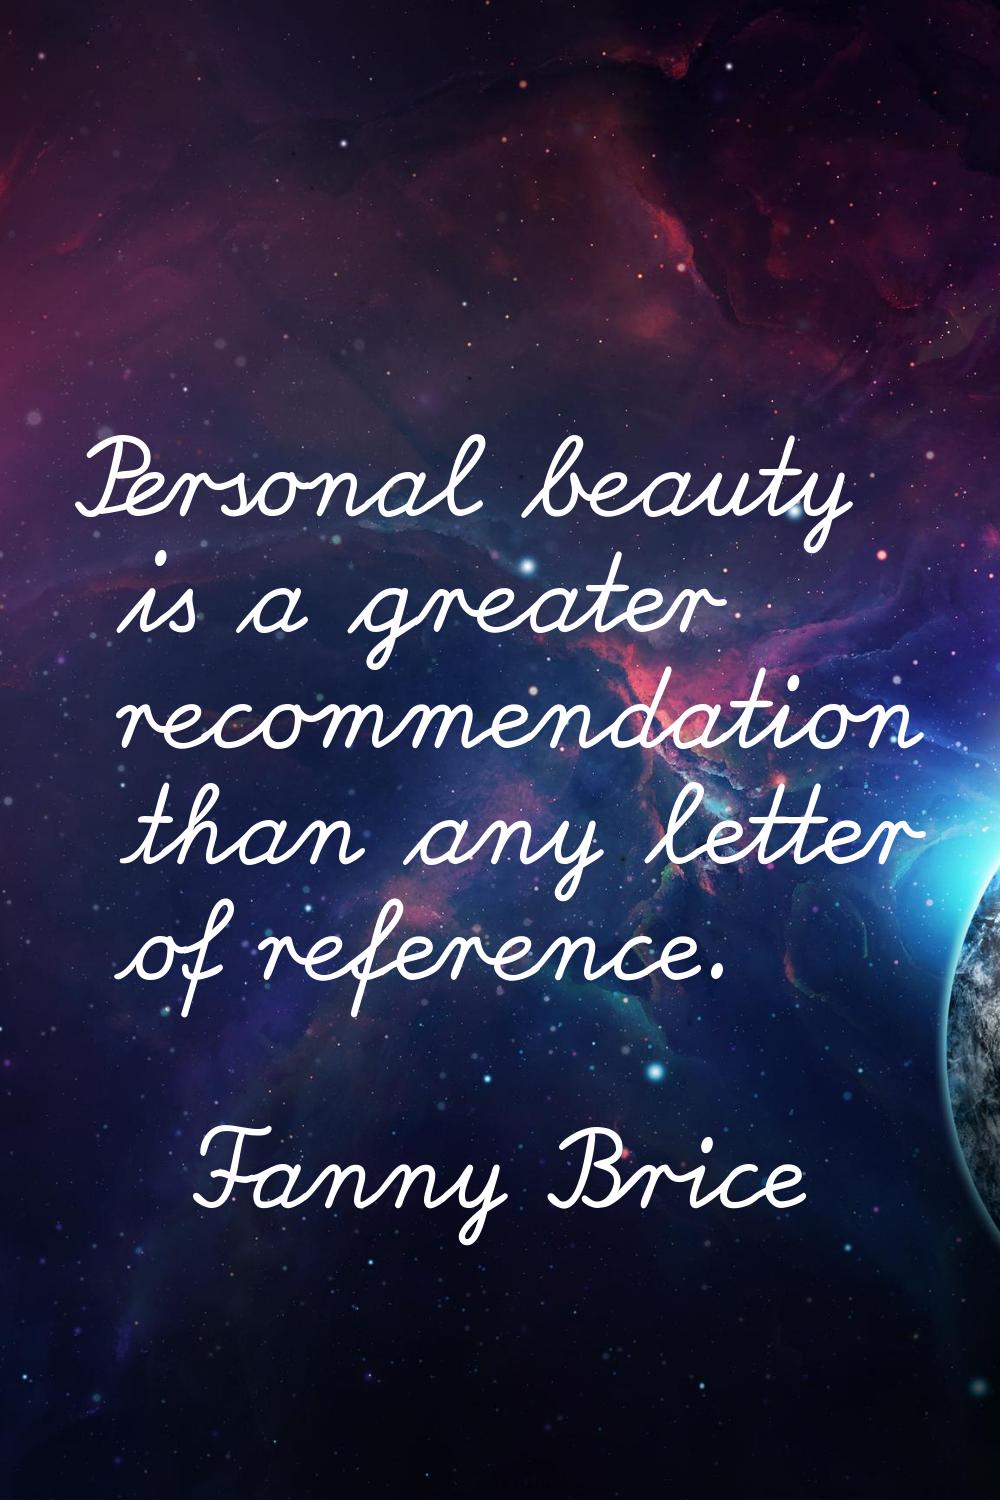 Personal beauty is a greater recommendation than any letter of reference.